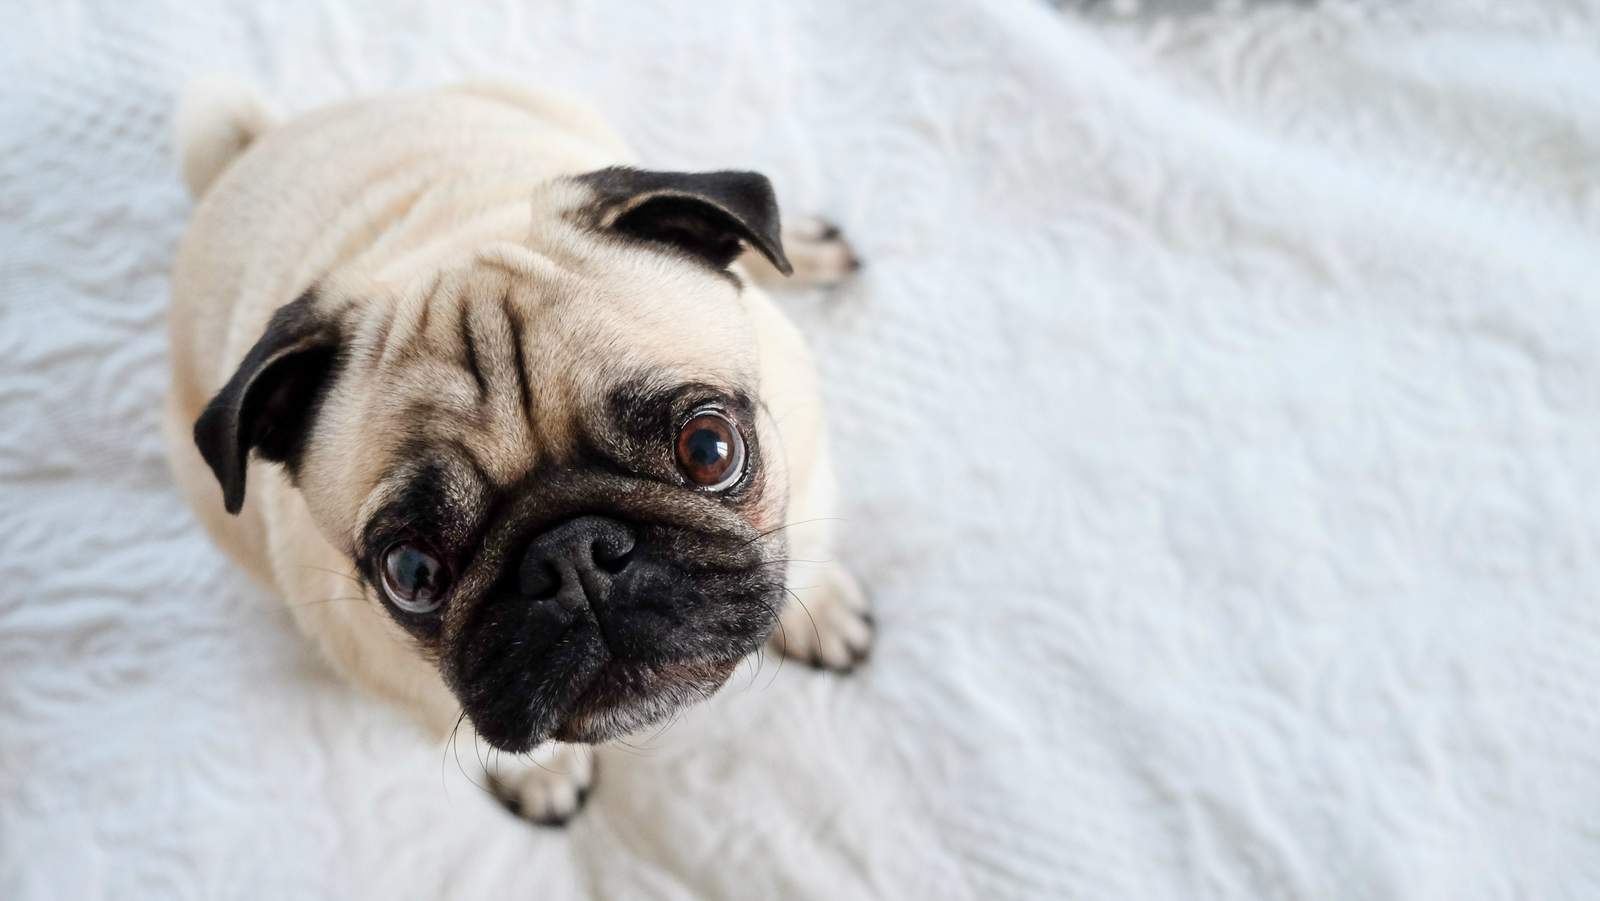 Pug in North Carolina may be 1st dog in US to test positive for coronavirus